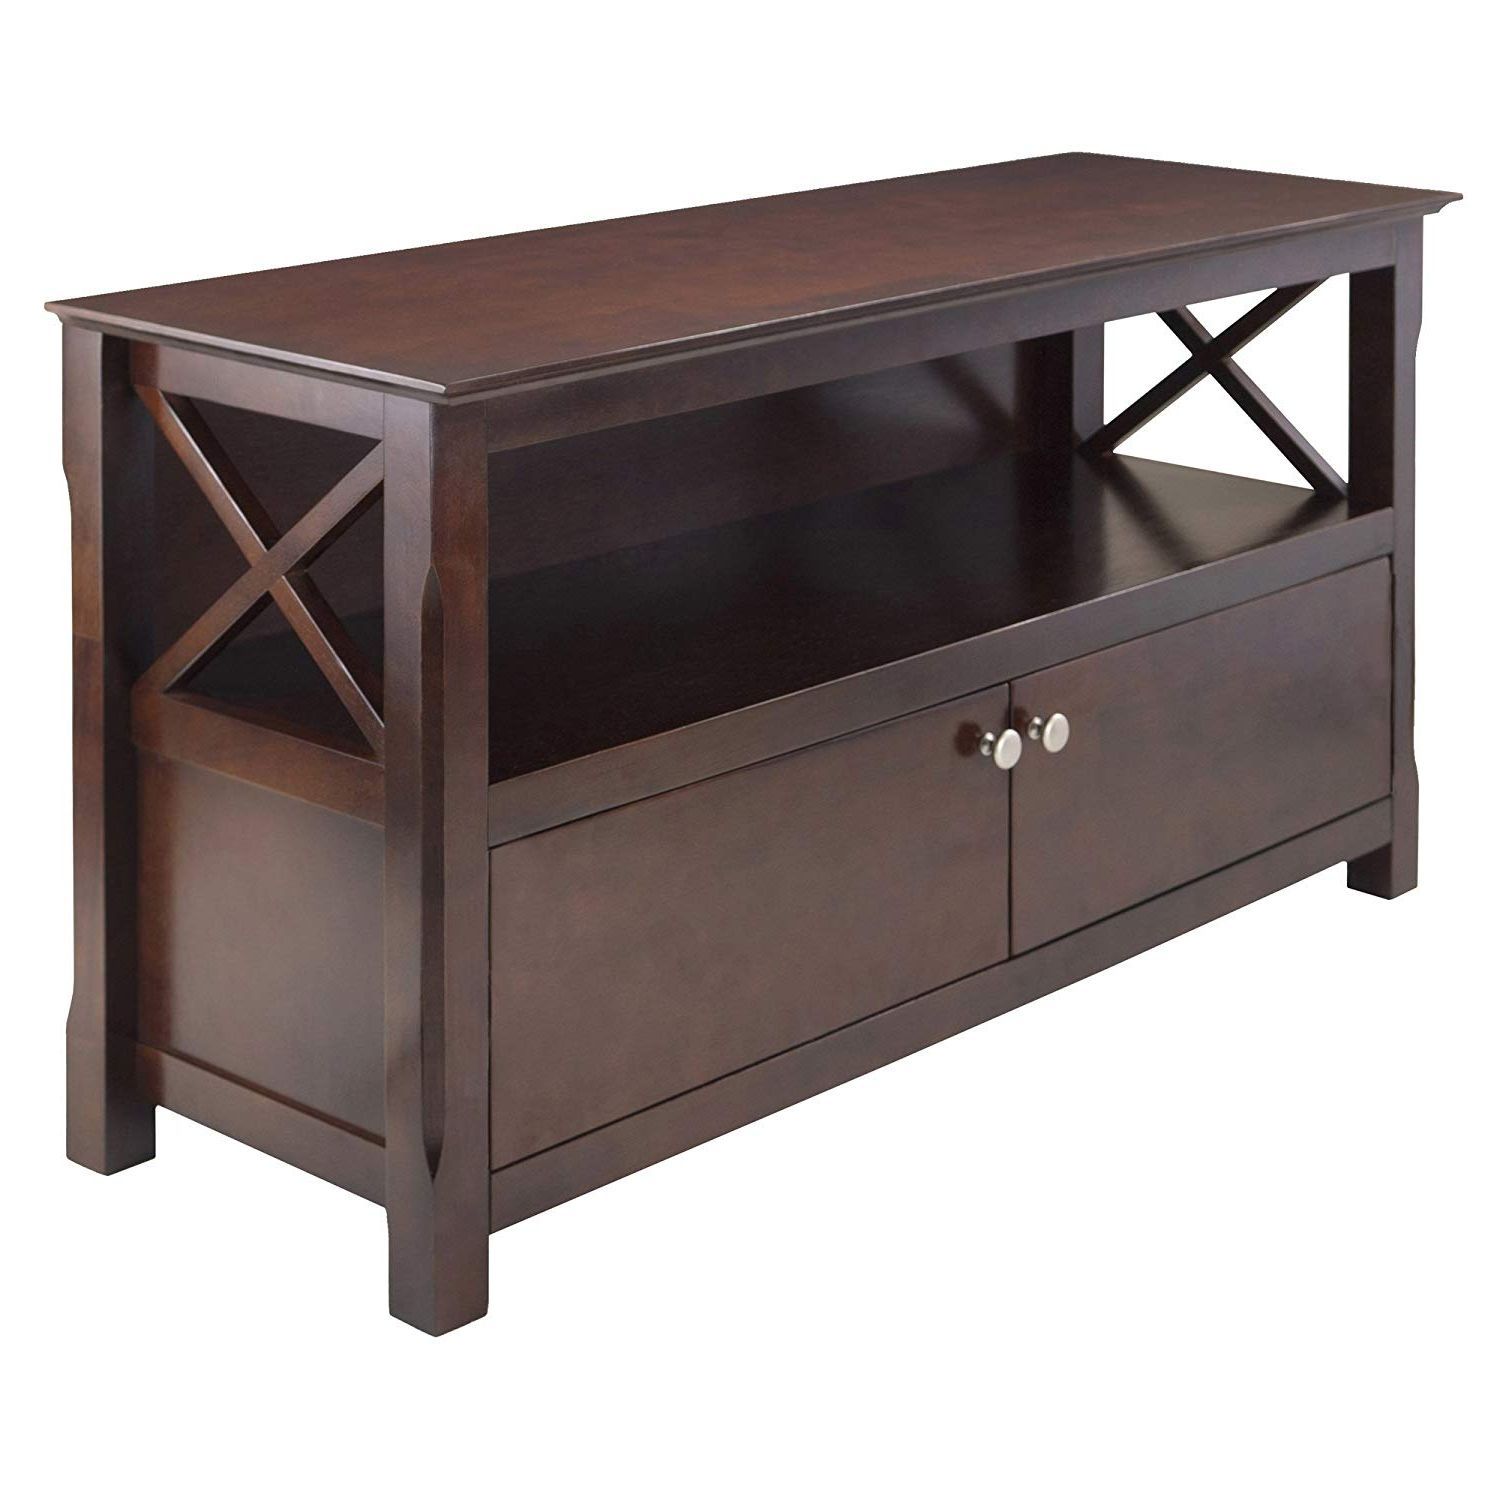 Amazon: Winsome Wood Xola Tv Stand: Kitchen & Dining Throughout Recent Square Tv Stands (View 17 of 20)